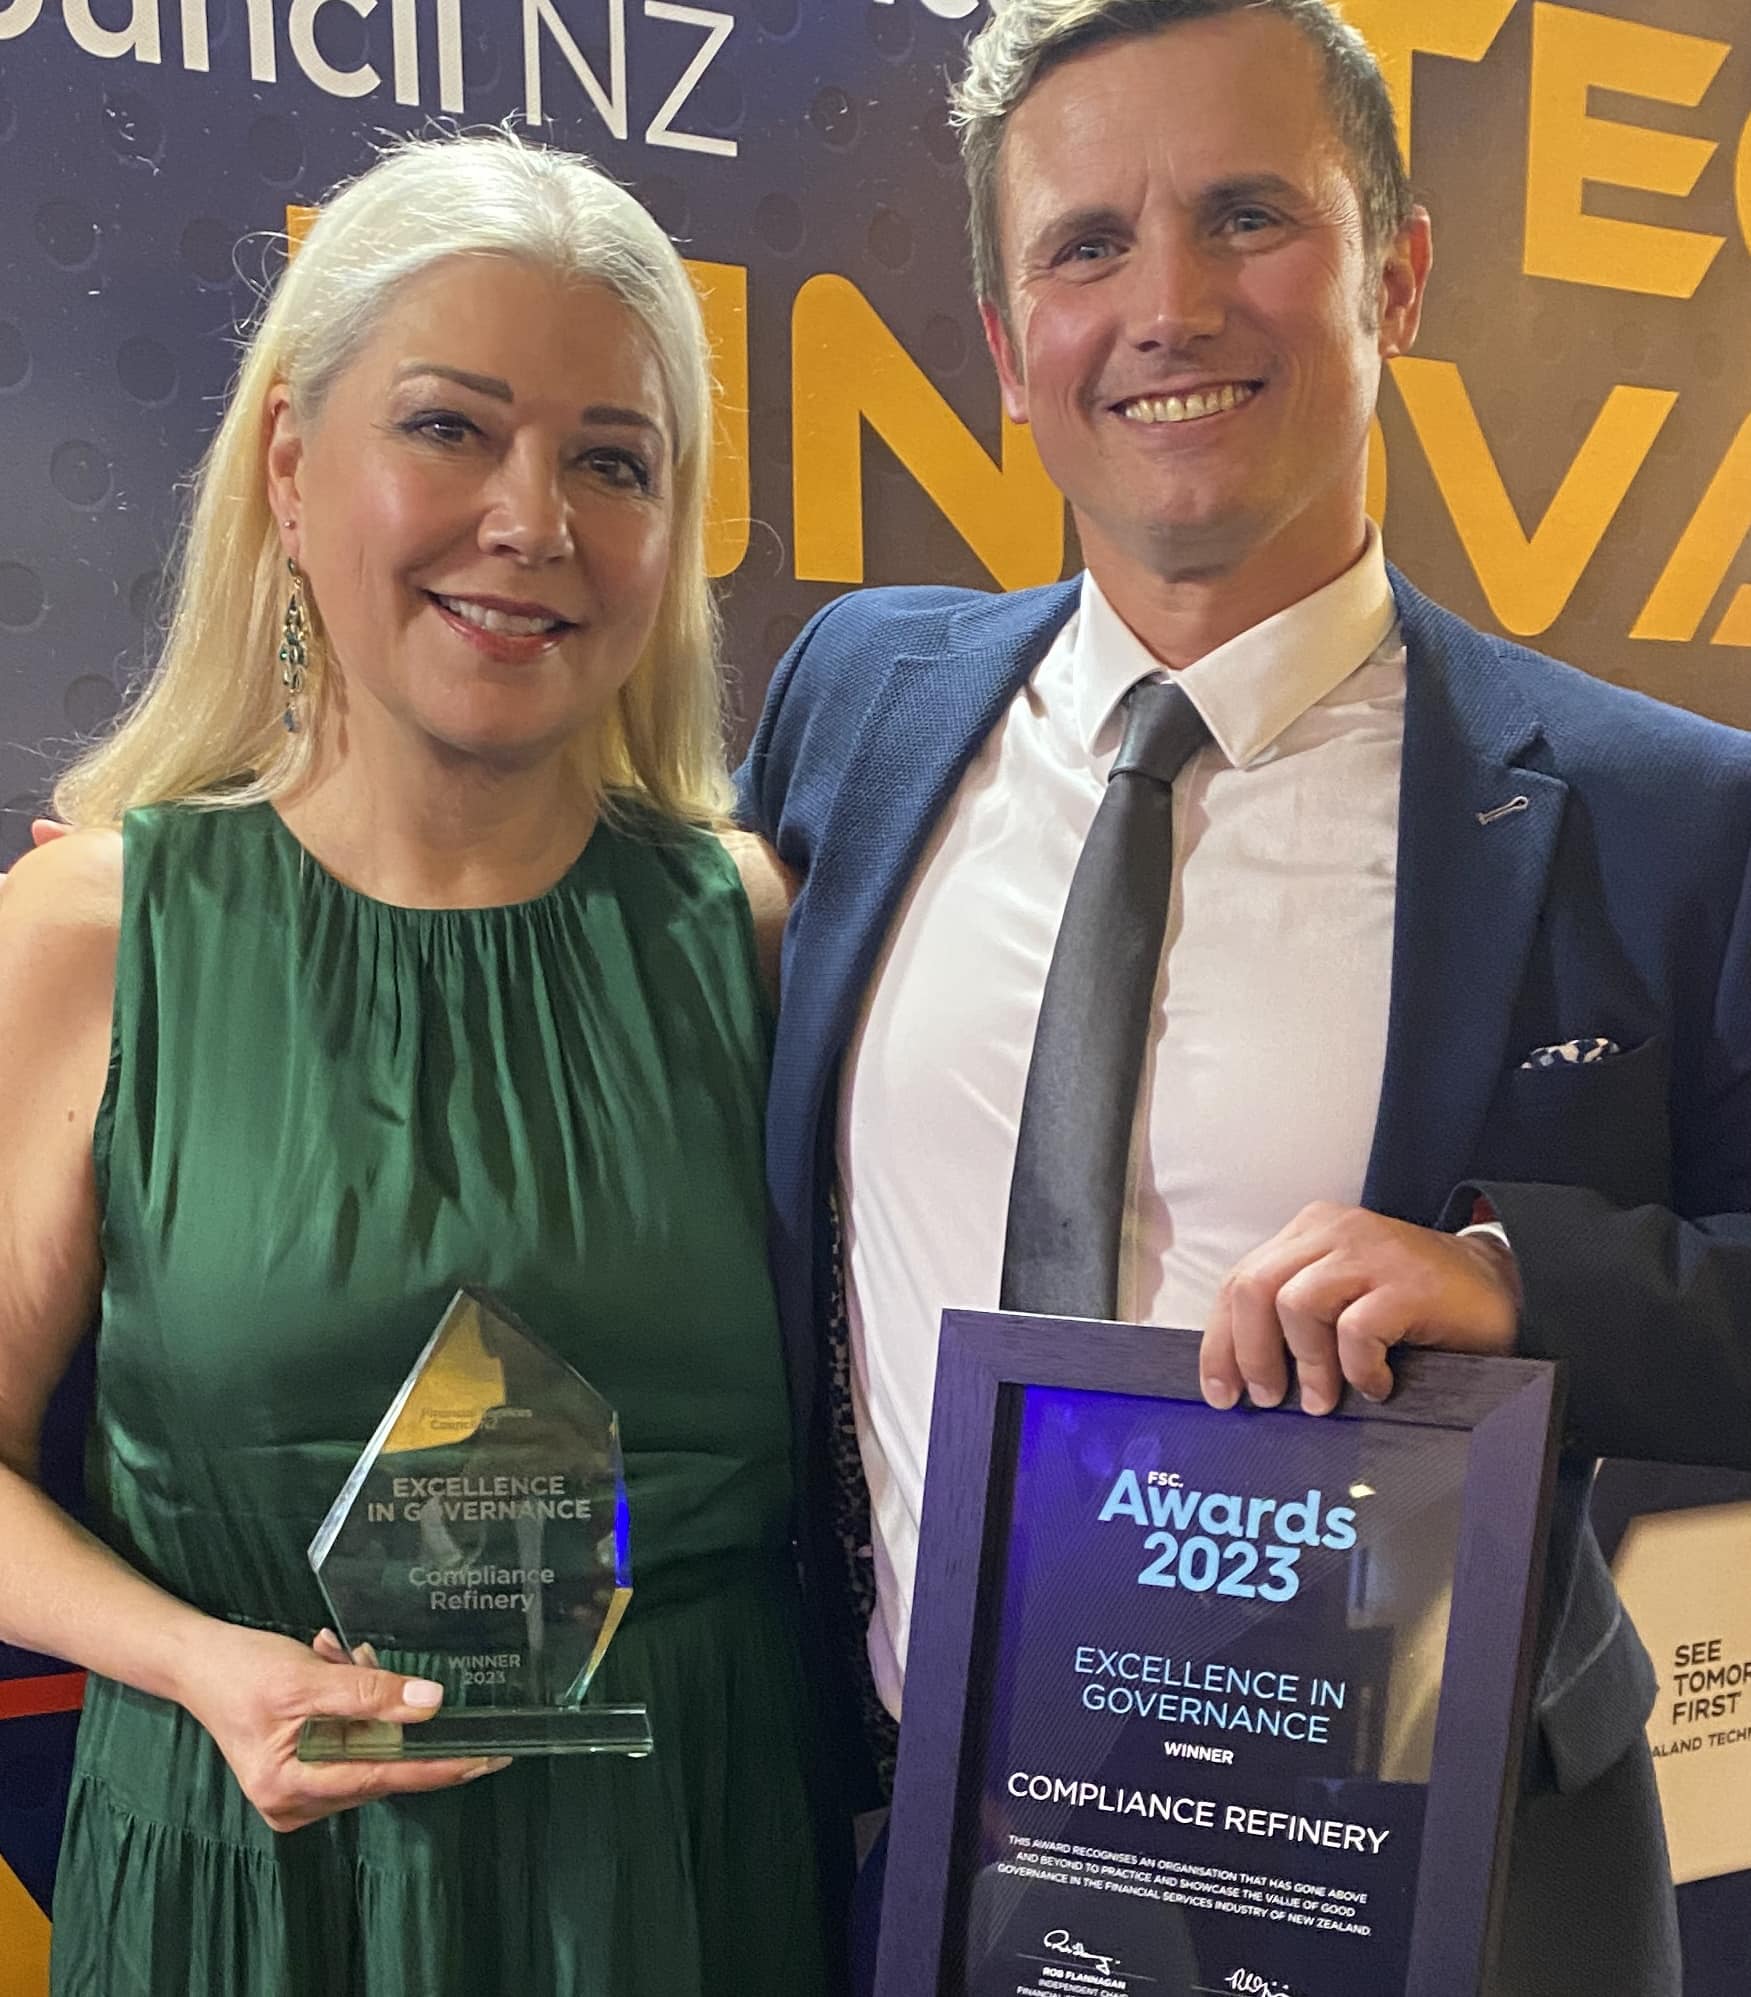 Award winners – Compliance Refinery's Melanie Purdey, Head of Governance and Steve Burgess, the firm's CEO.